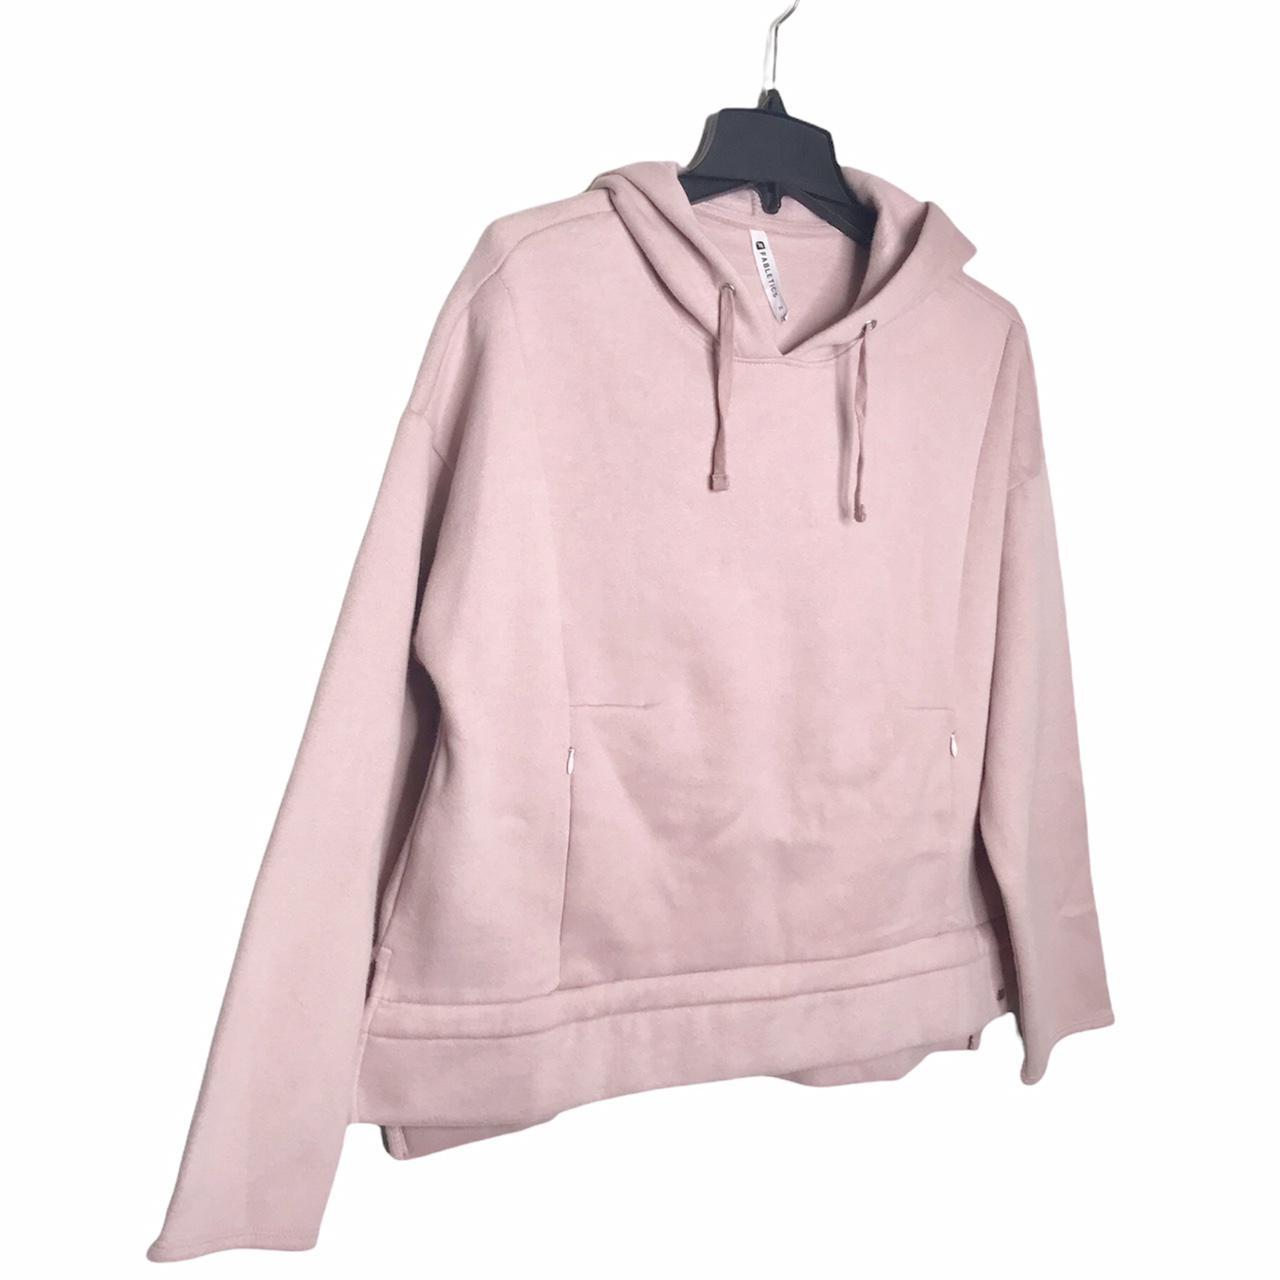 Product Image 2 - Fabletics Rayna Hoodie

Off-duty days call